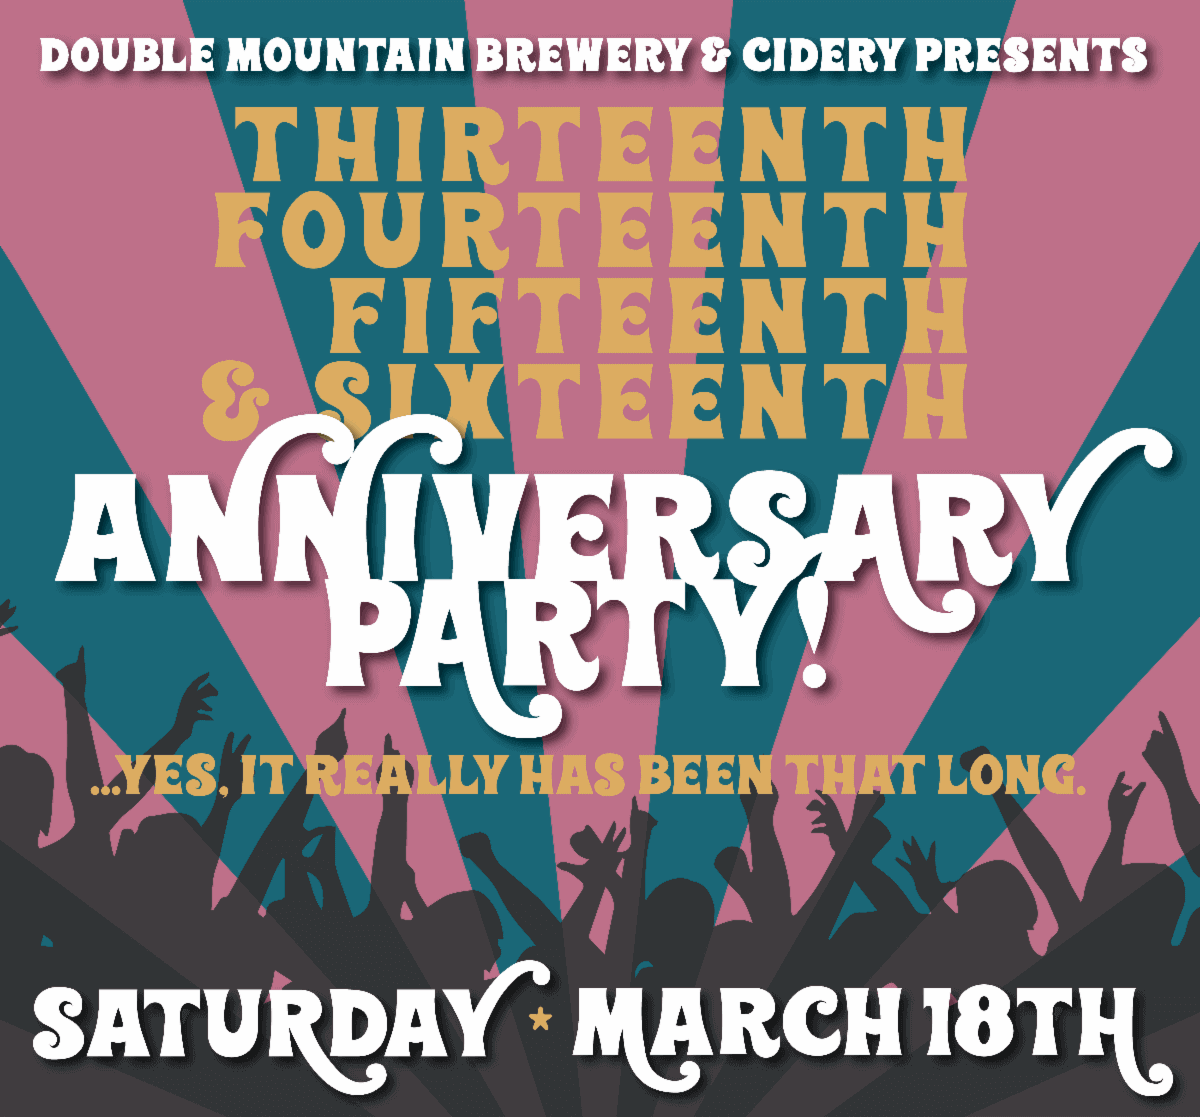 Double Mountain Brewery’s anniversary party is back, Saturday, March 18